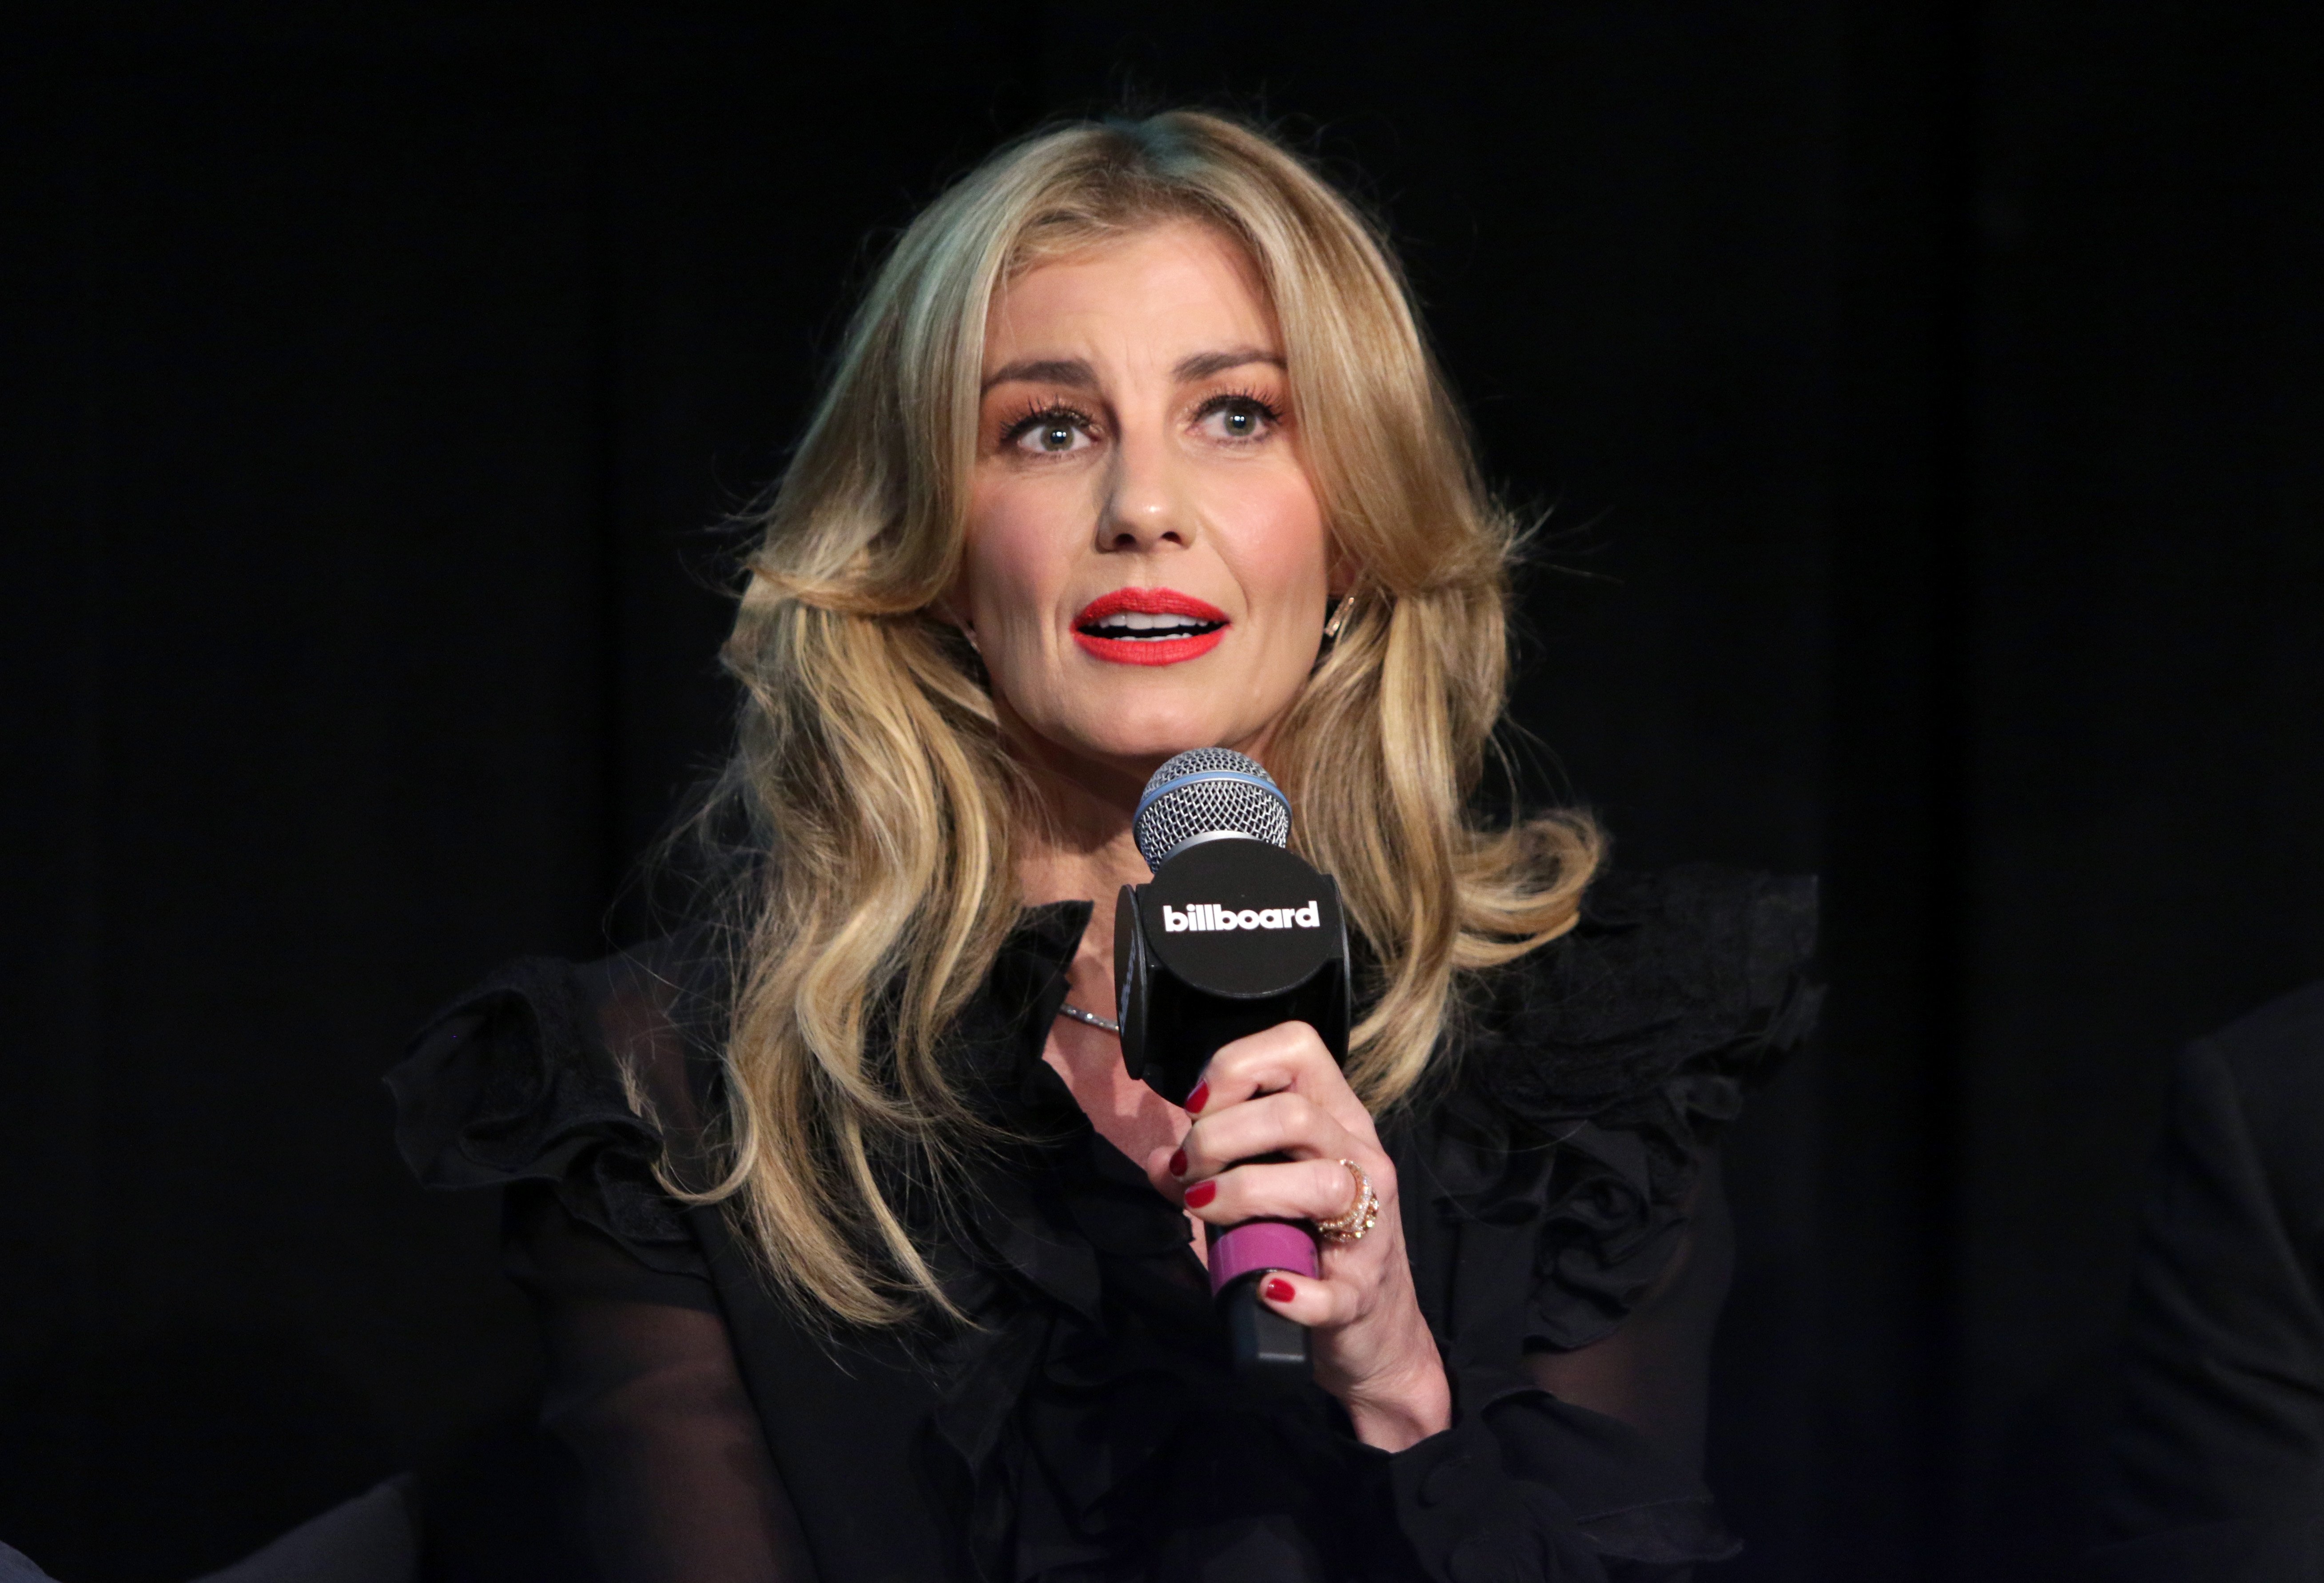  Faith Hill speaks during the Billboard 2017 Touring Conference - Legends Of Live: Tim McGraw And Faith Hill at Montage Beverly Hills on November 14, 2017 | Photo: GettyImages